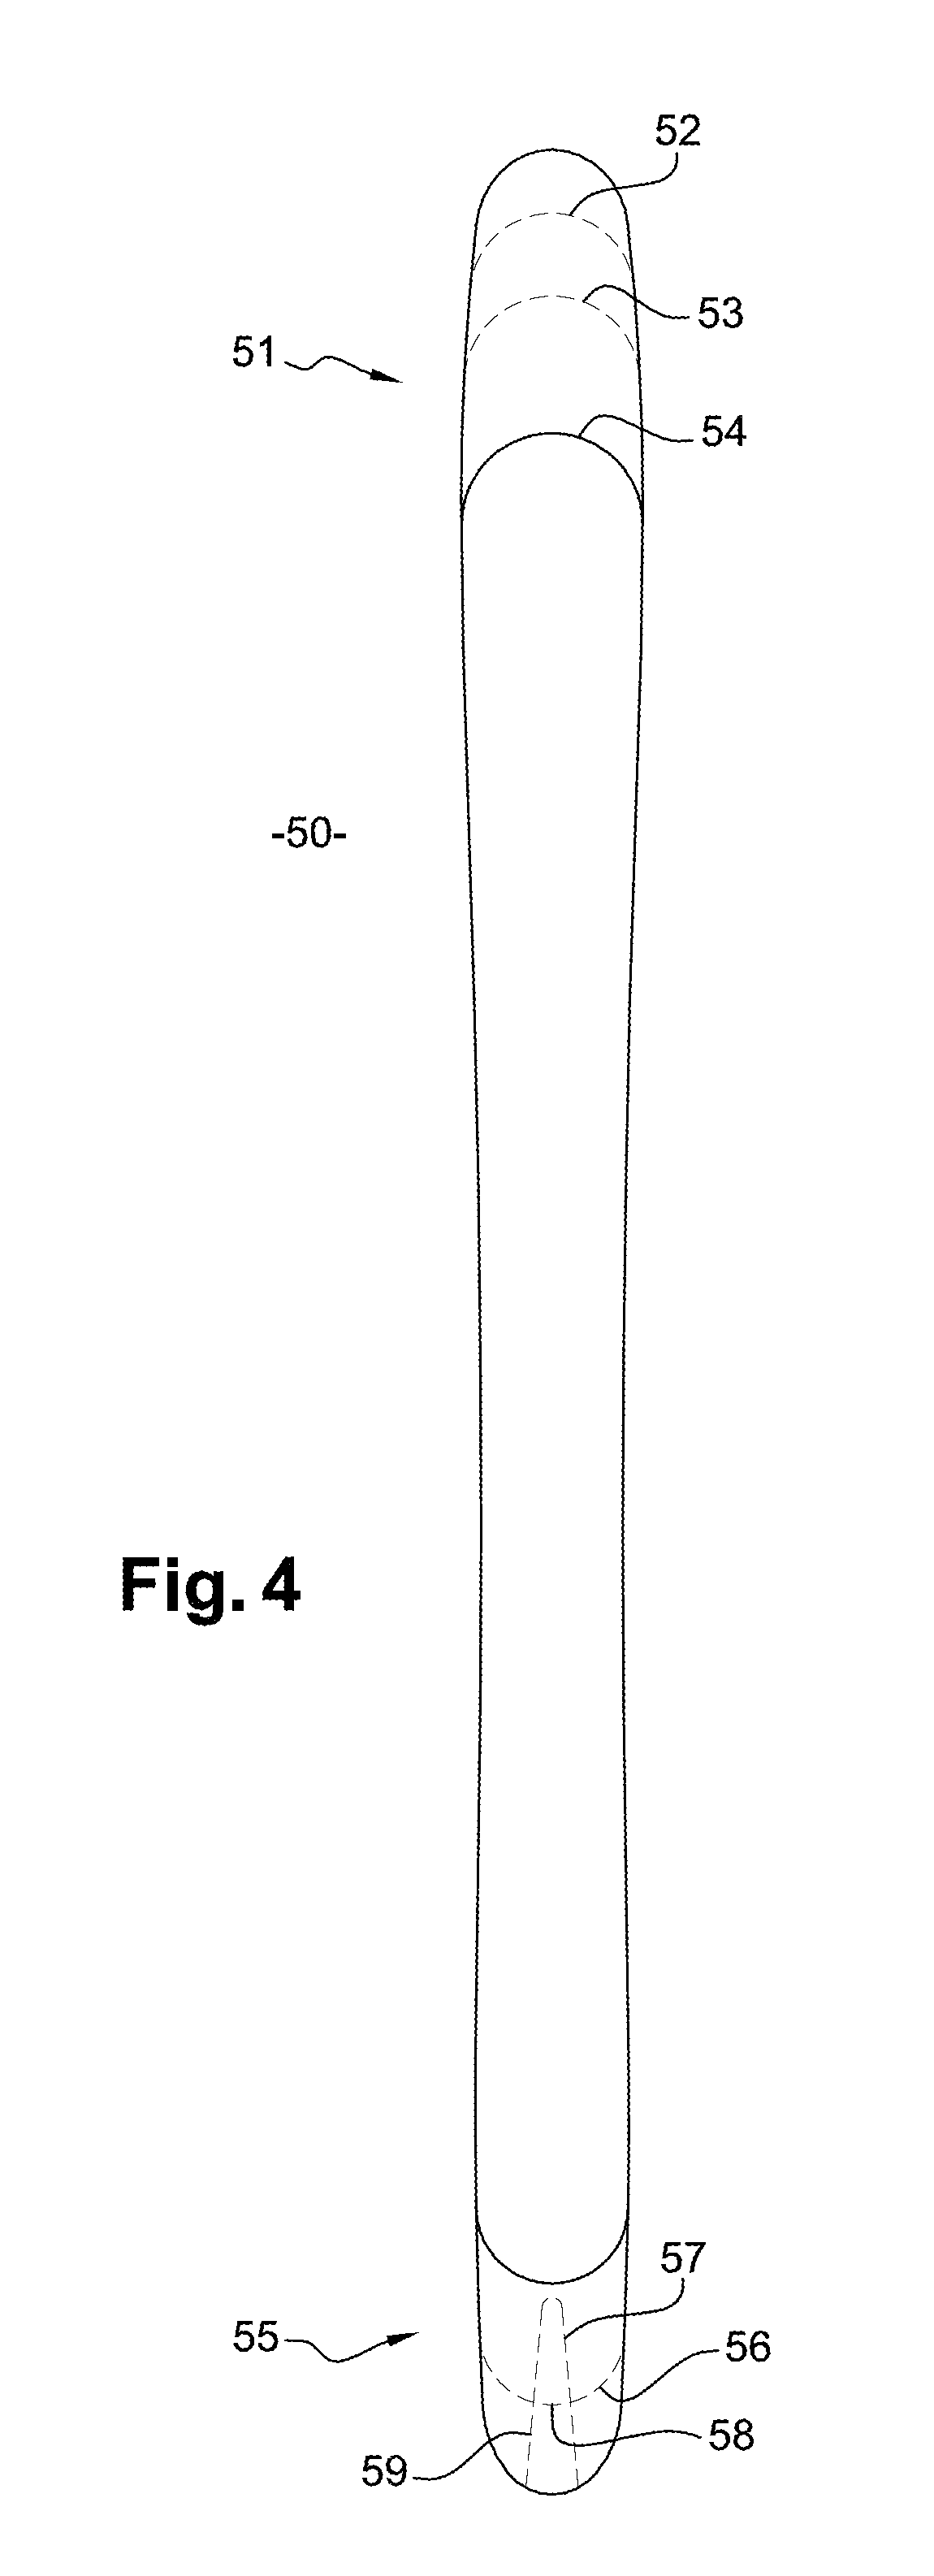 Snow gliding board structure element, and gliding board incorporating such an element